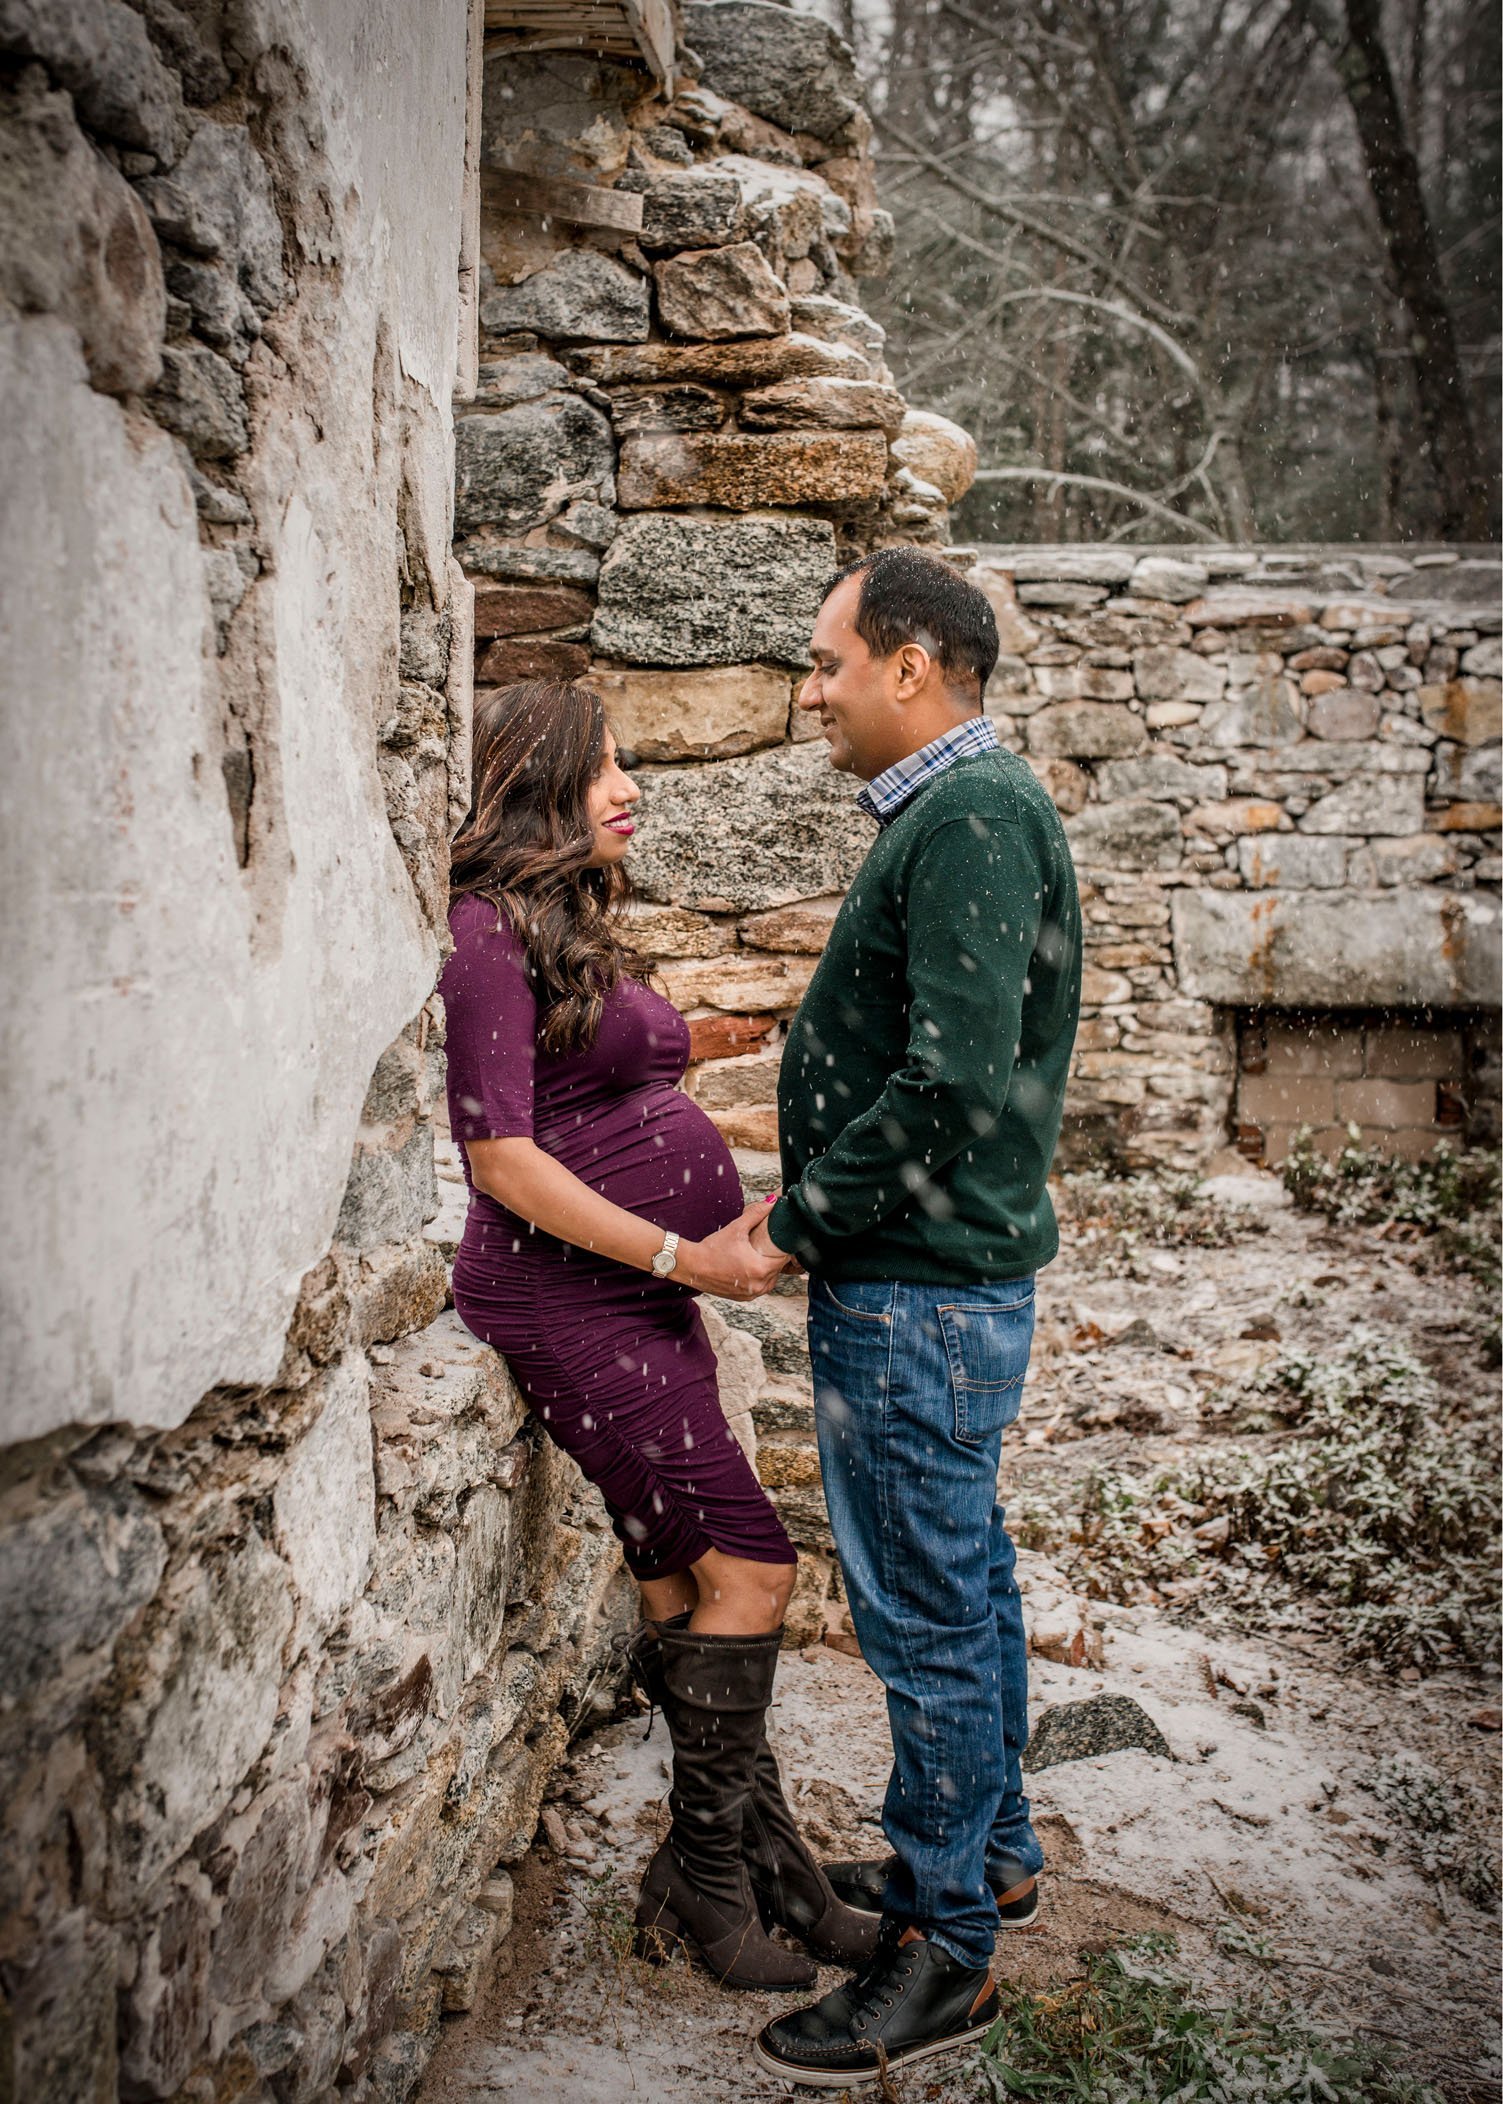 Indian mom and dad to-be outside in building ruins in the snow